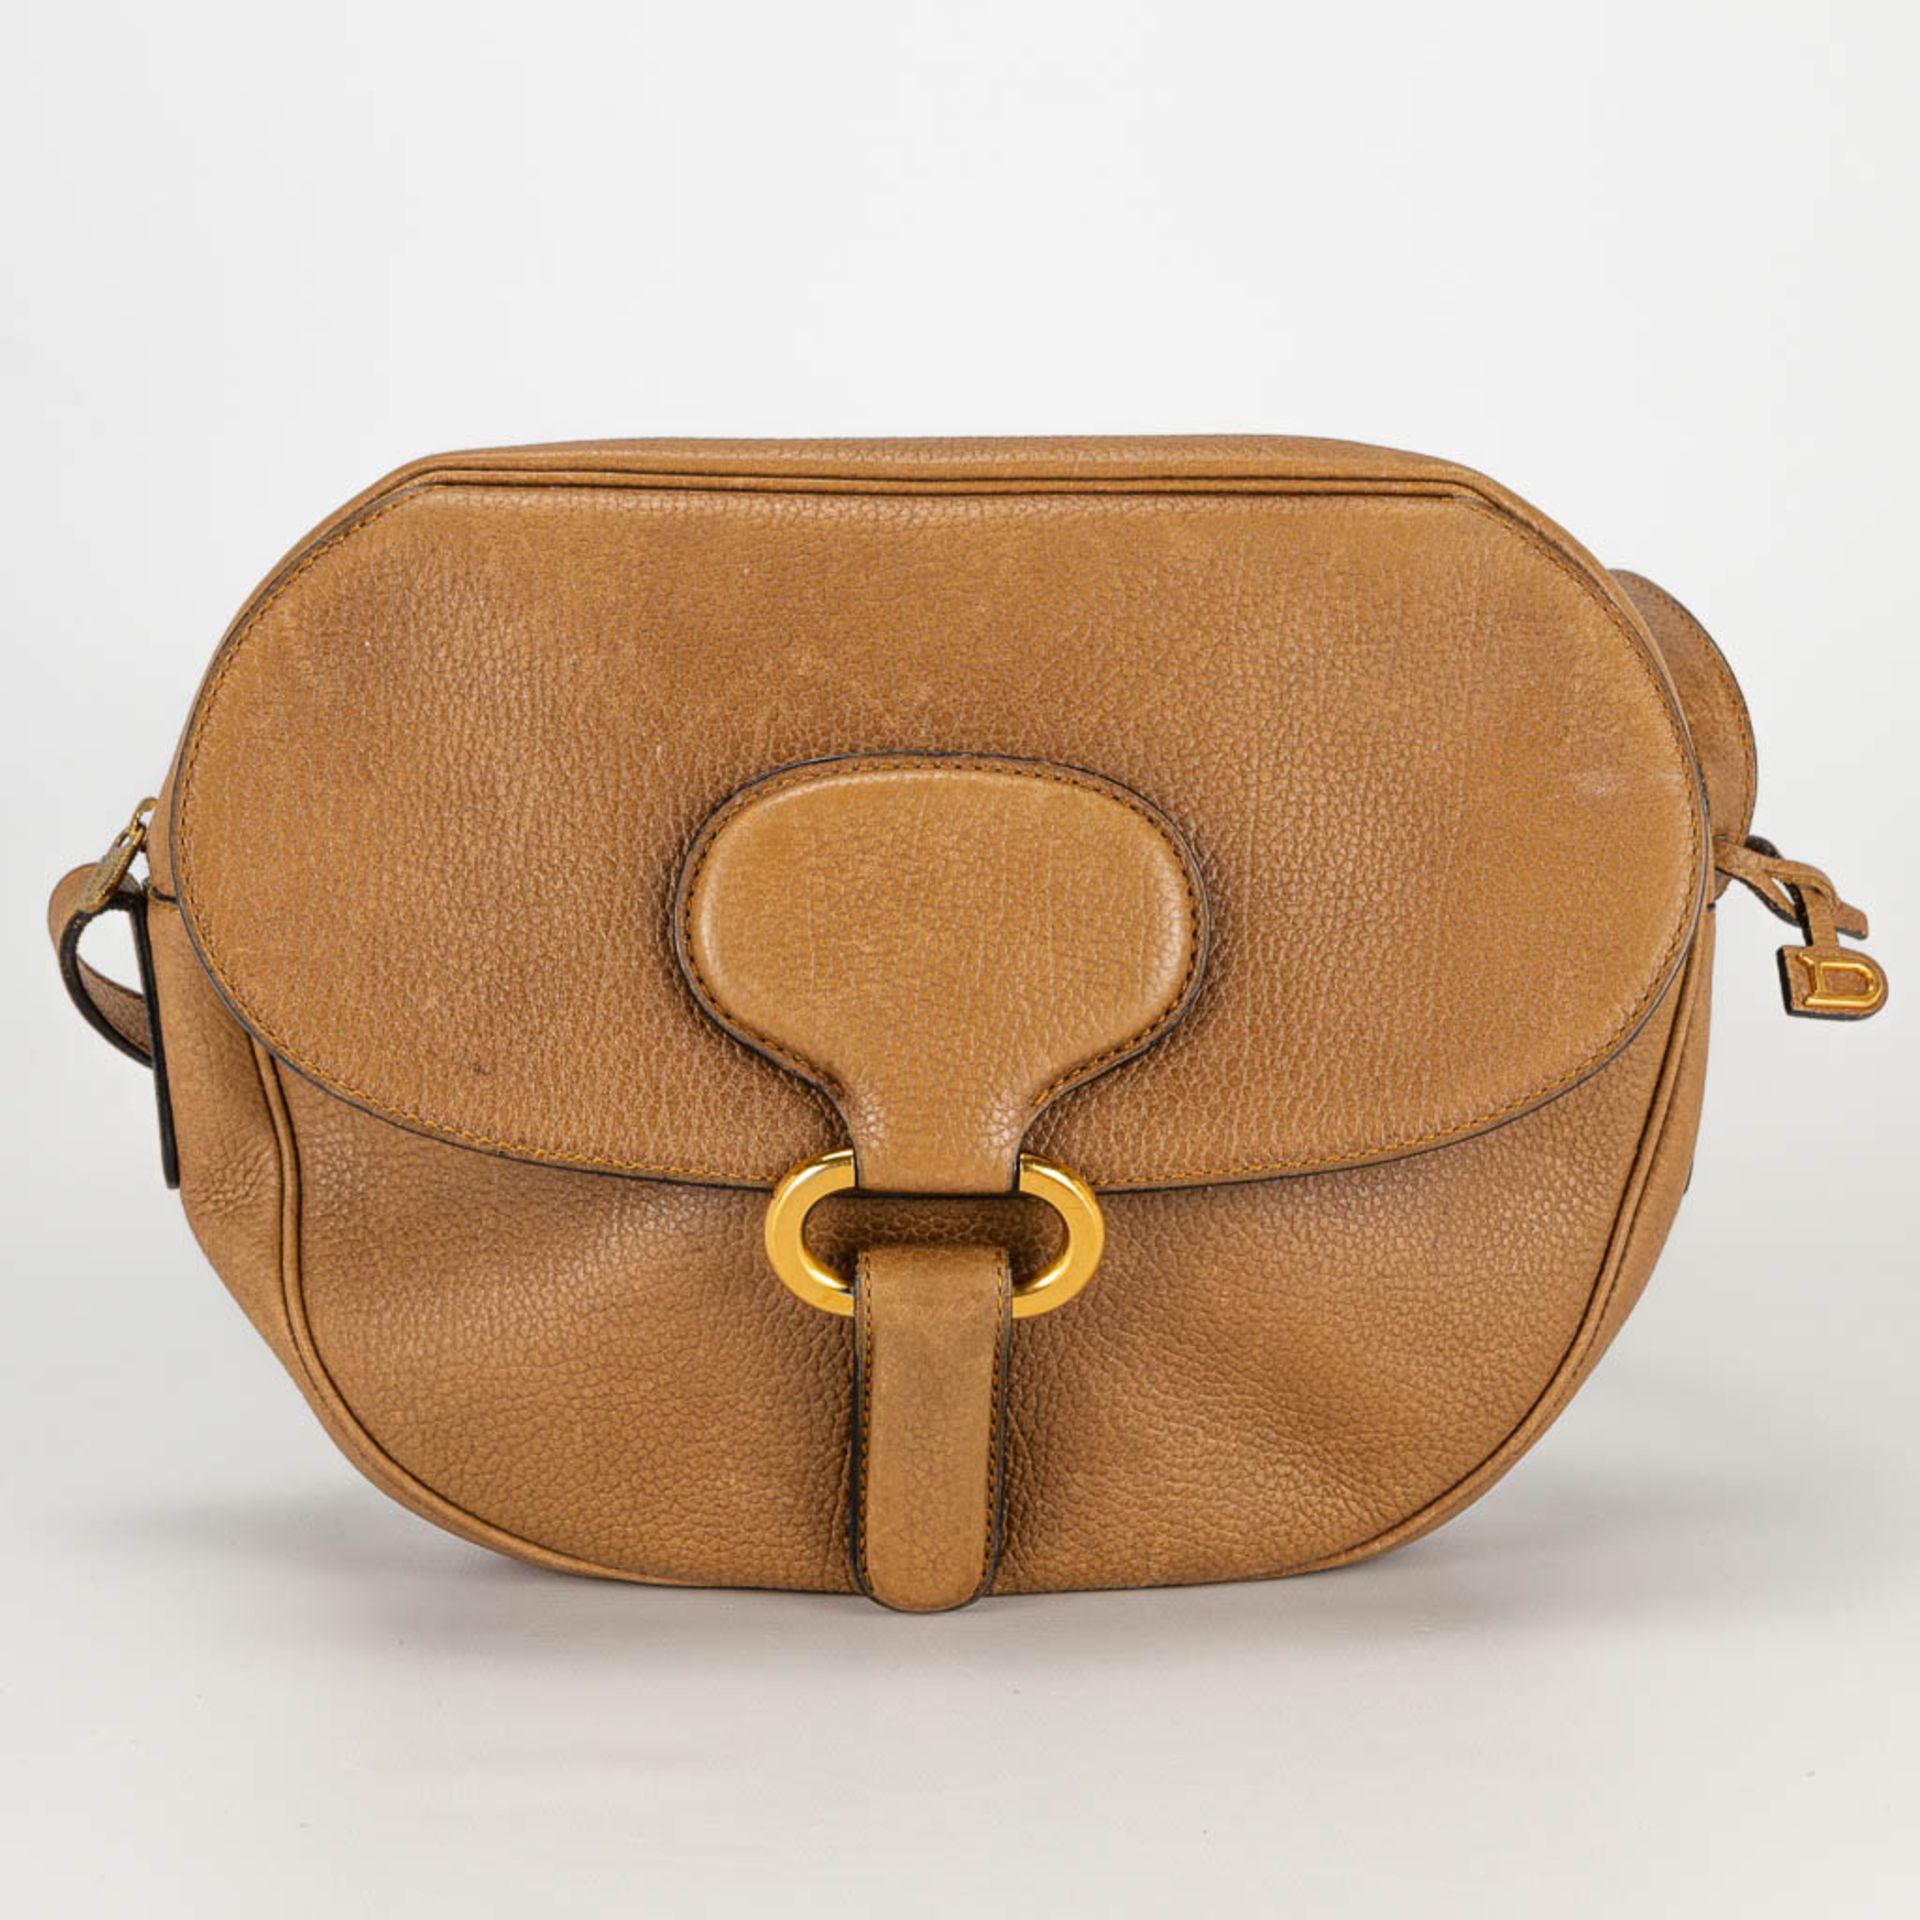 A purse made of brown leather and marked Delvaux - Image 6 of 14